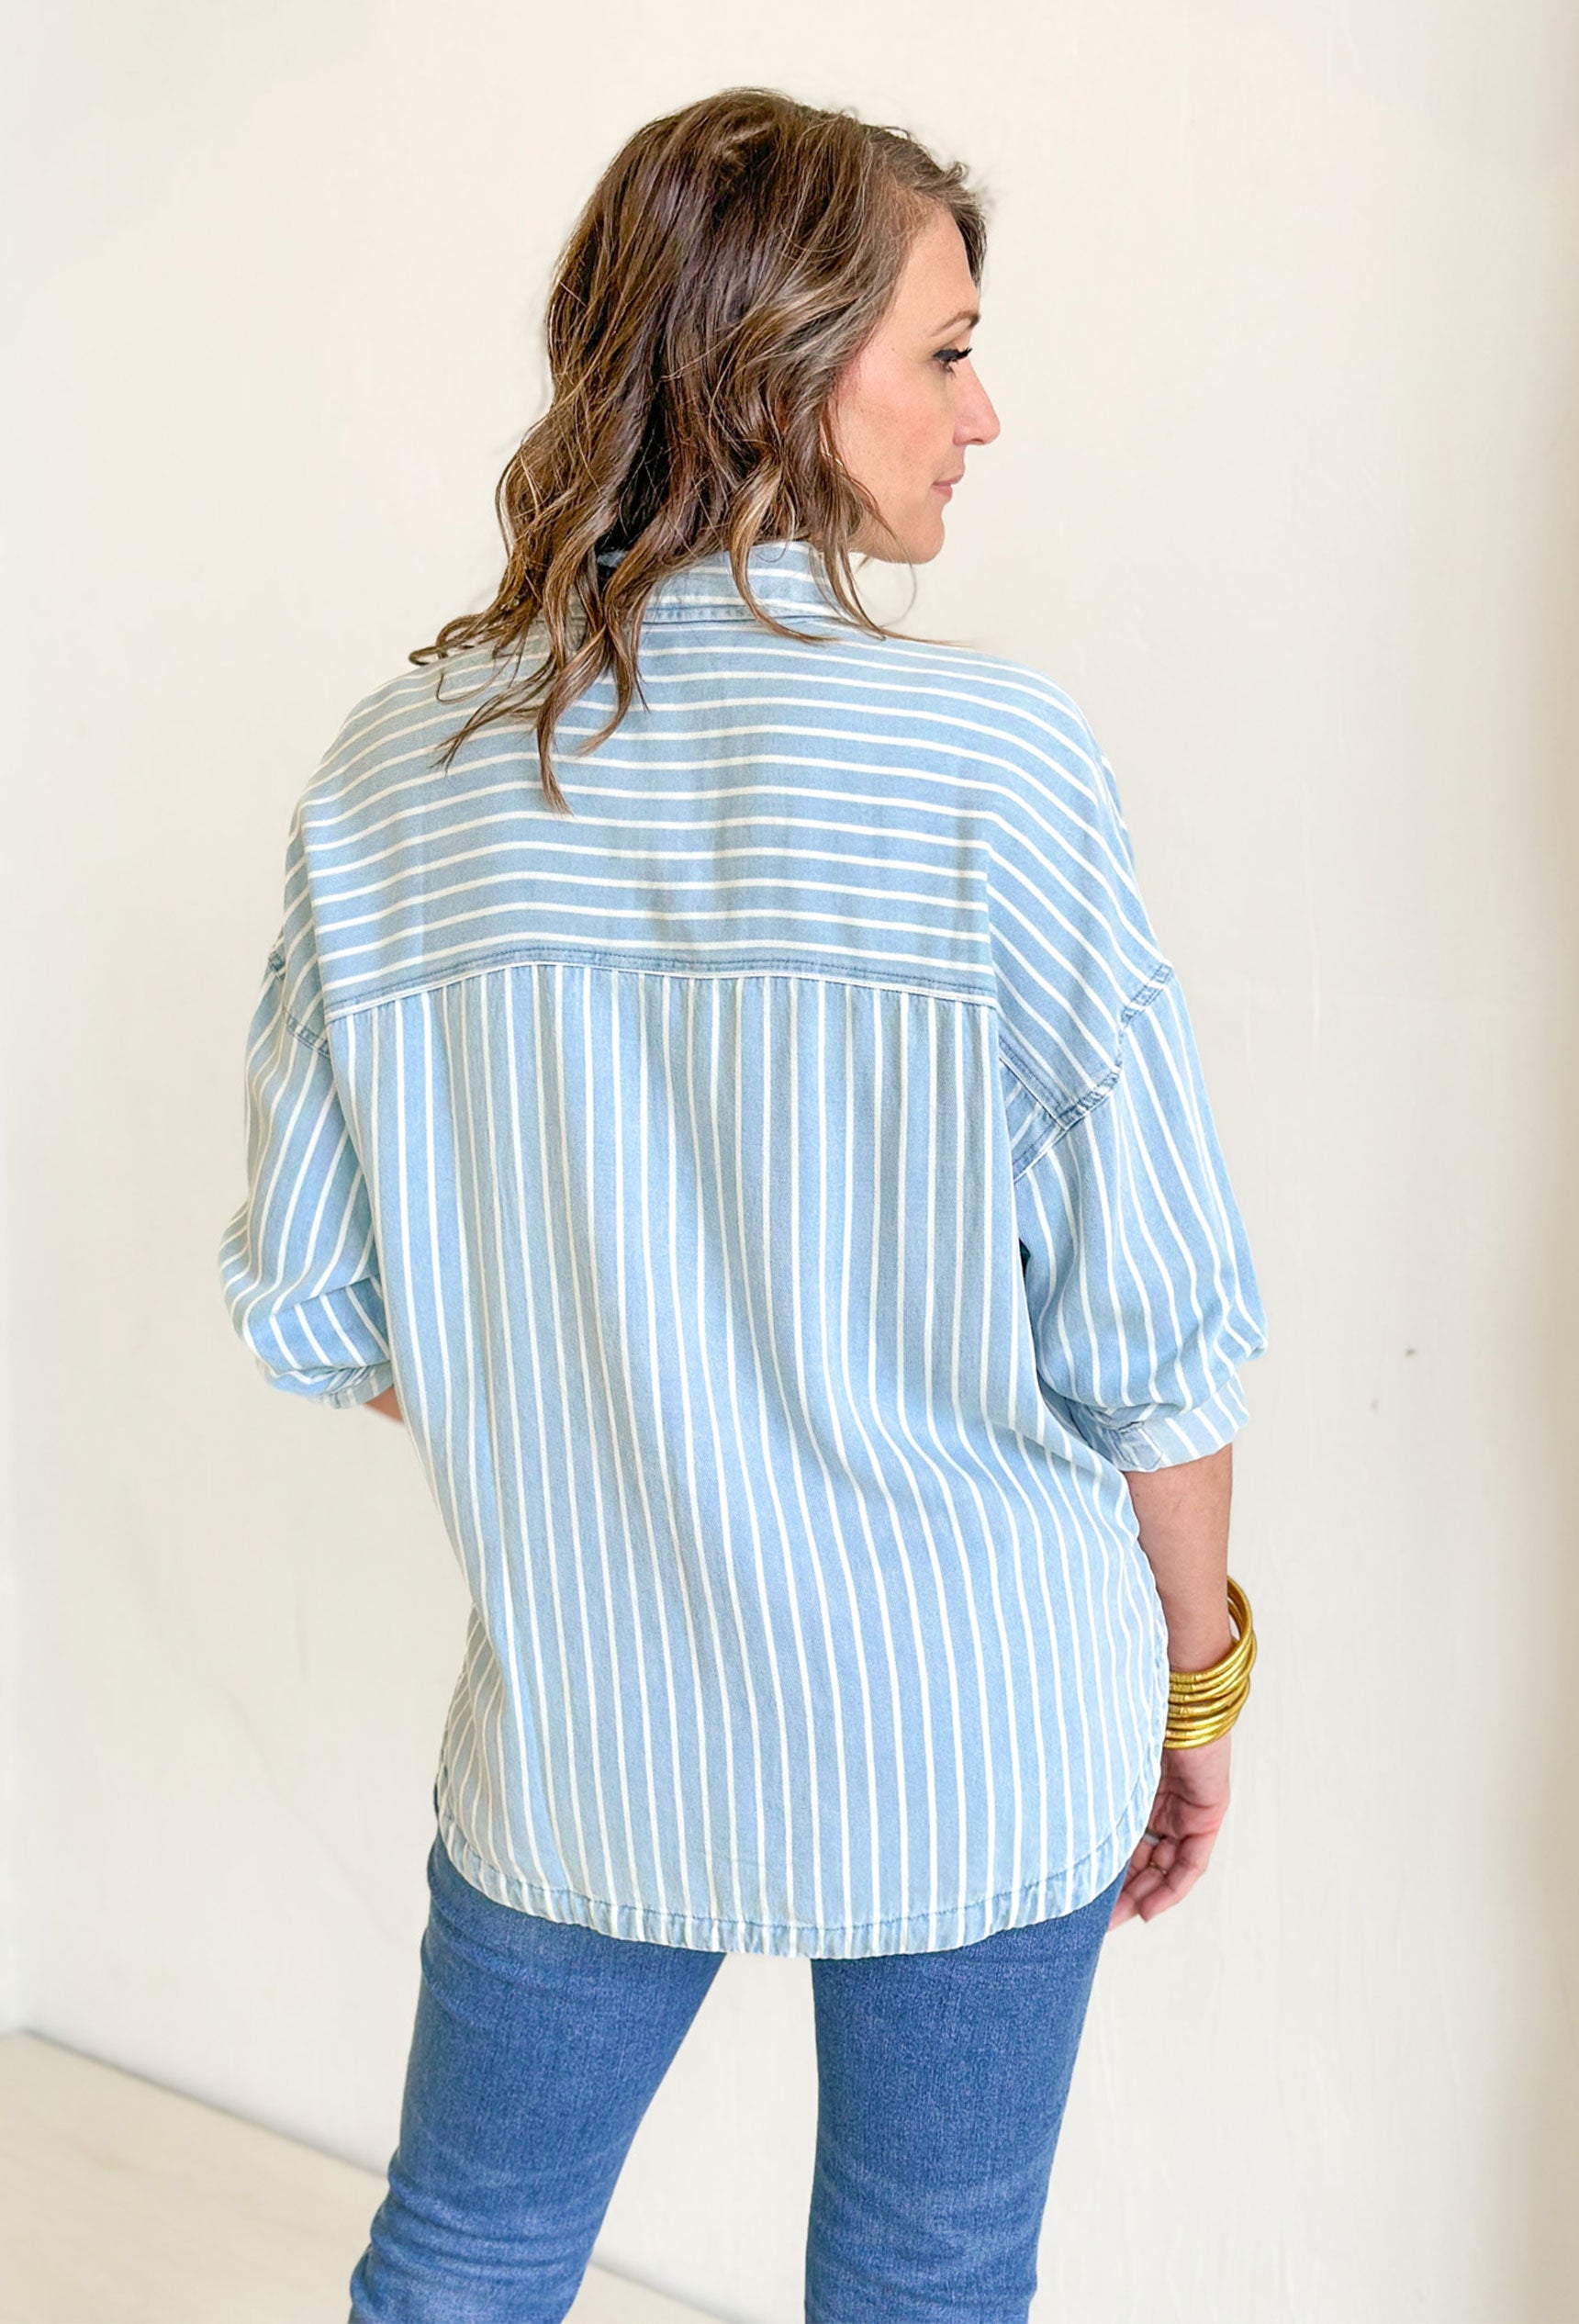 Passing Time Striped Button Up Top, denim and white striped button up with two front pockets